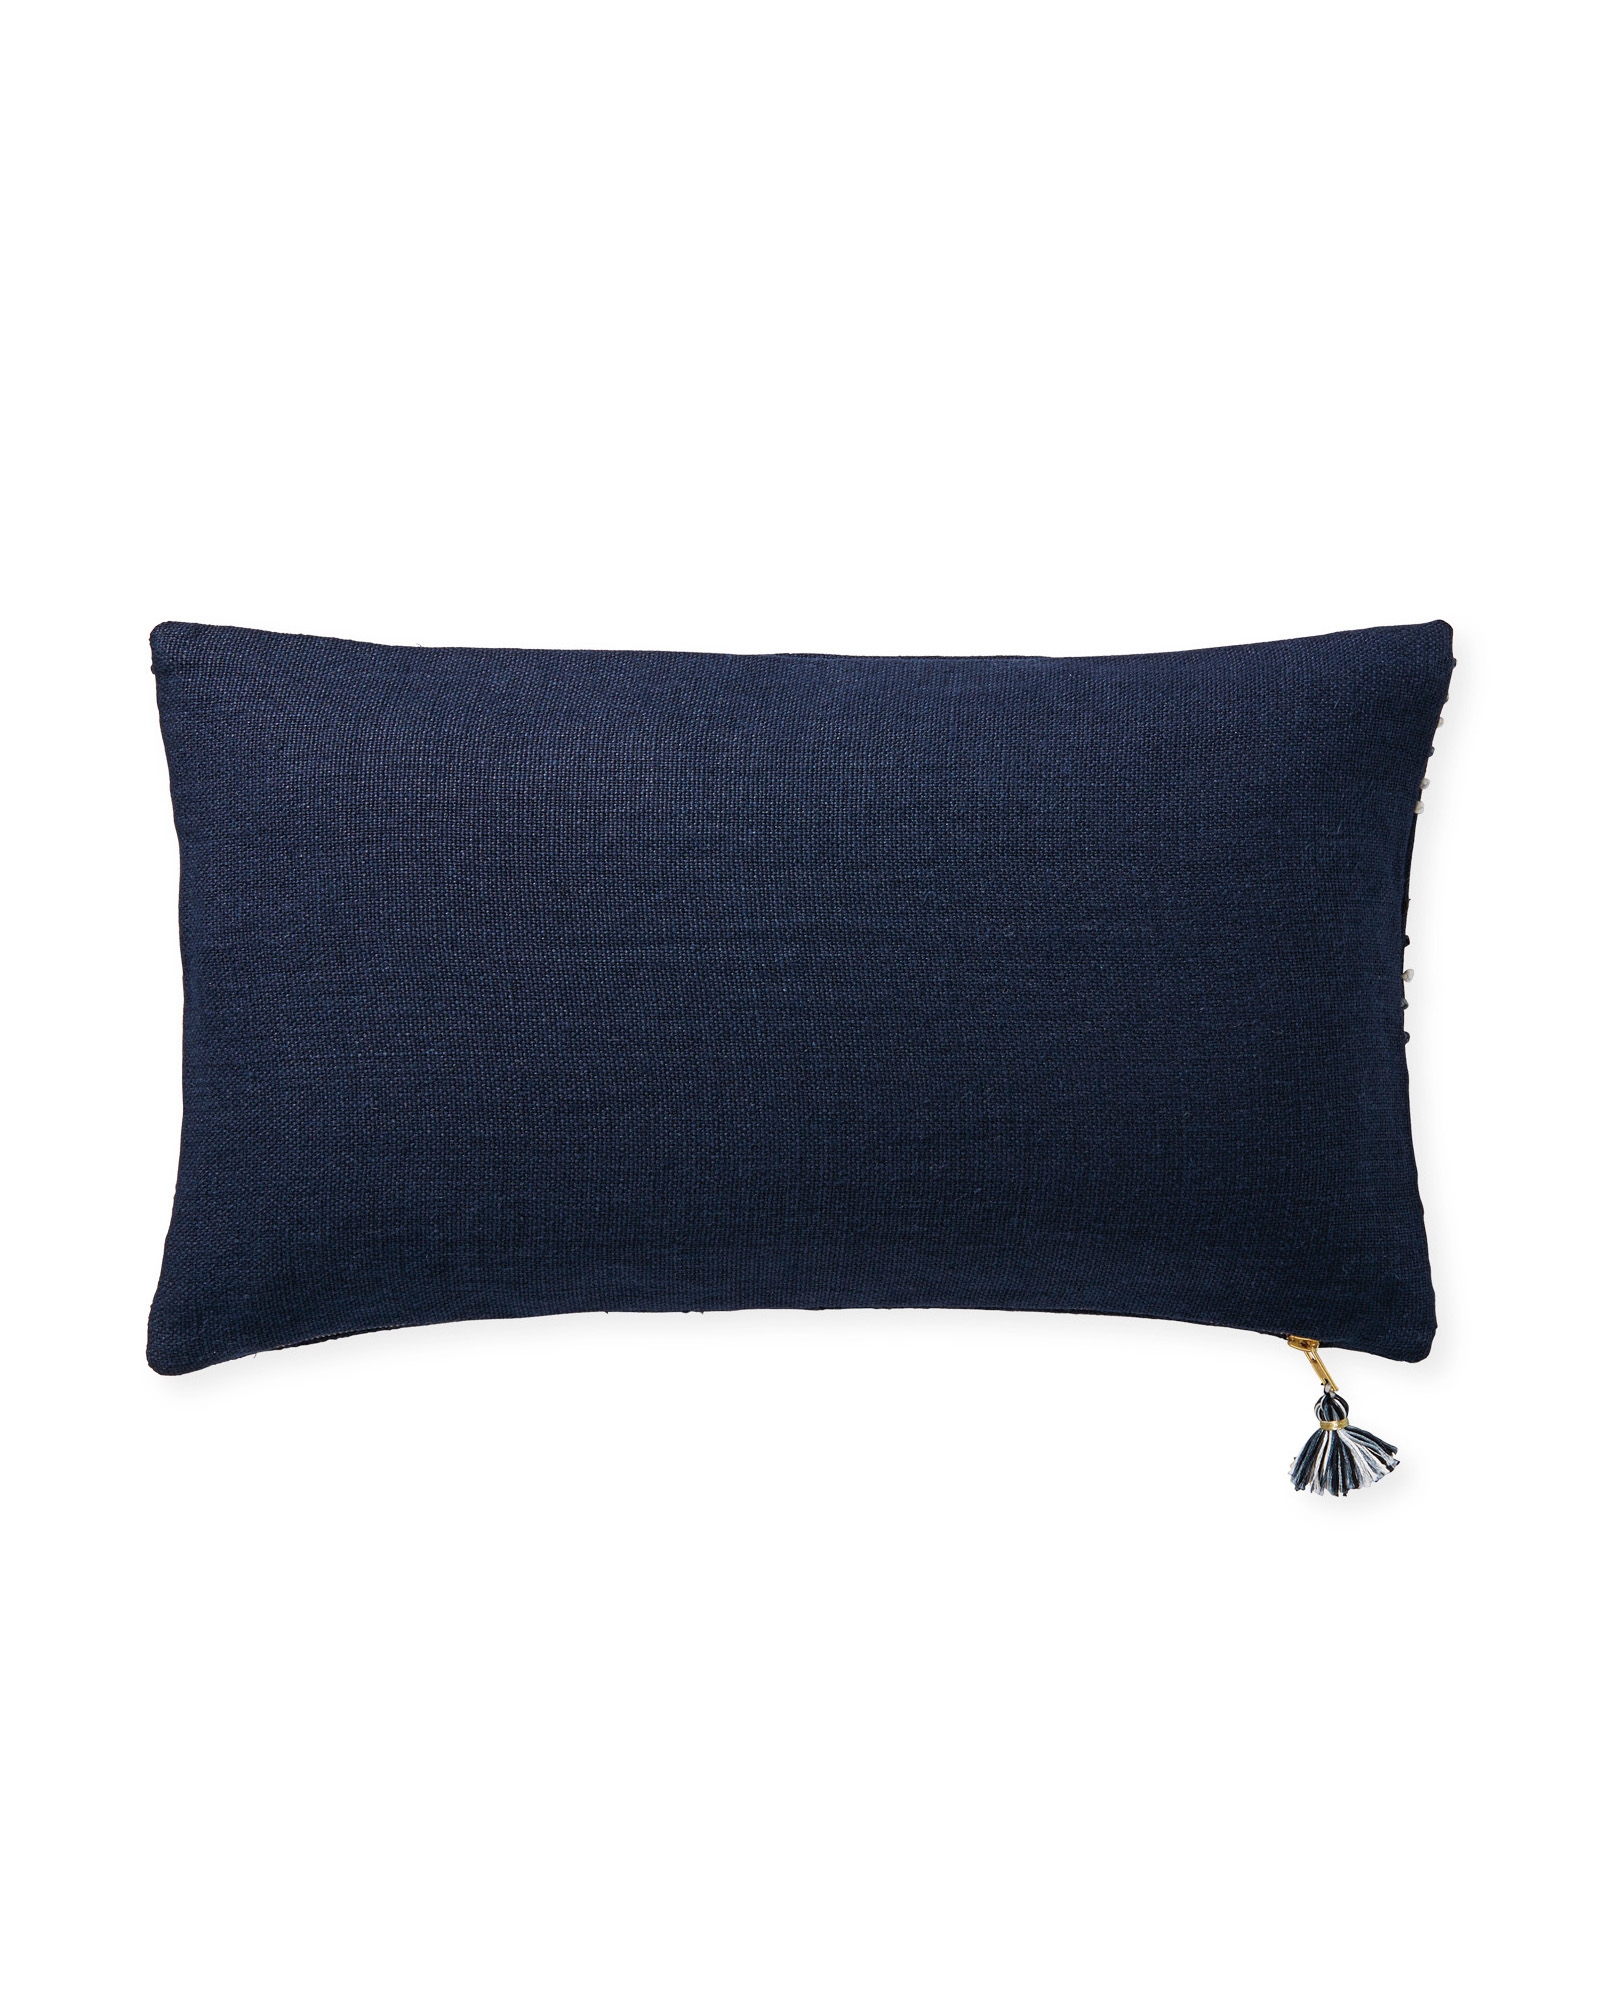 Pryce 12" x 21" Pillow Cover - Navy - Insert sold separately - Image 1